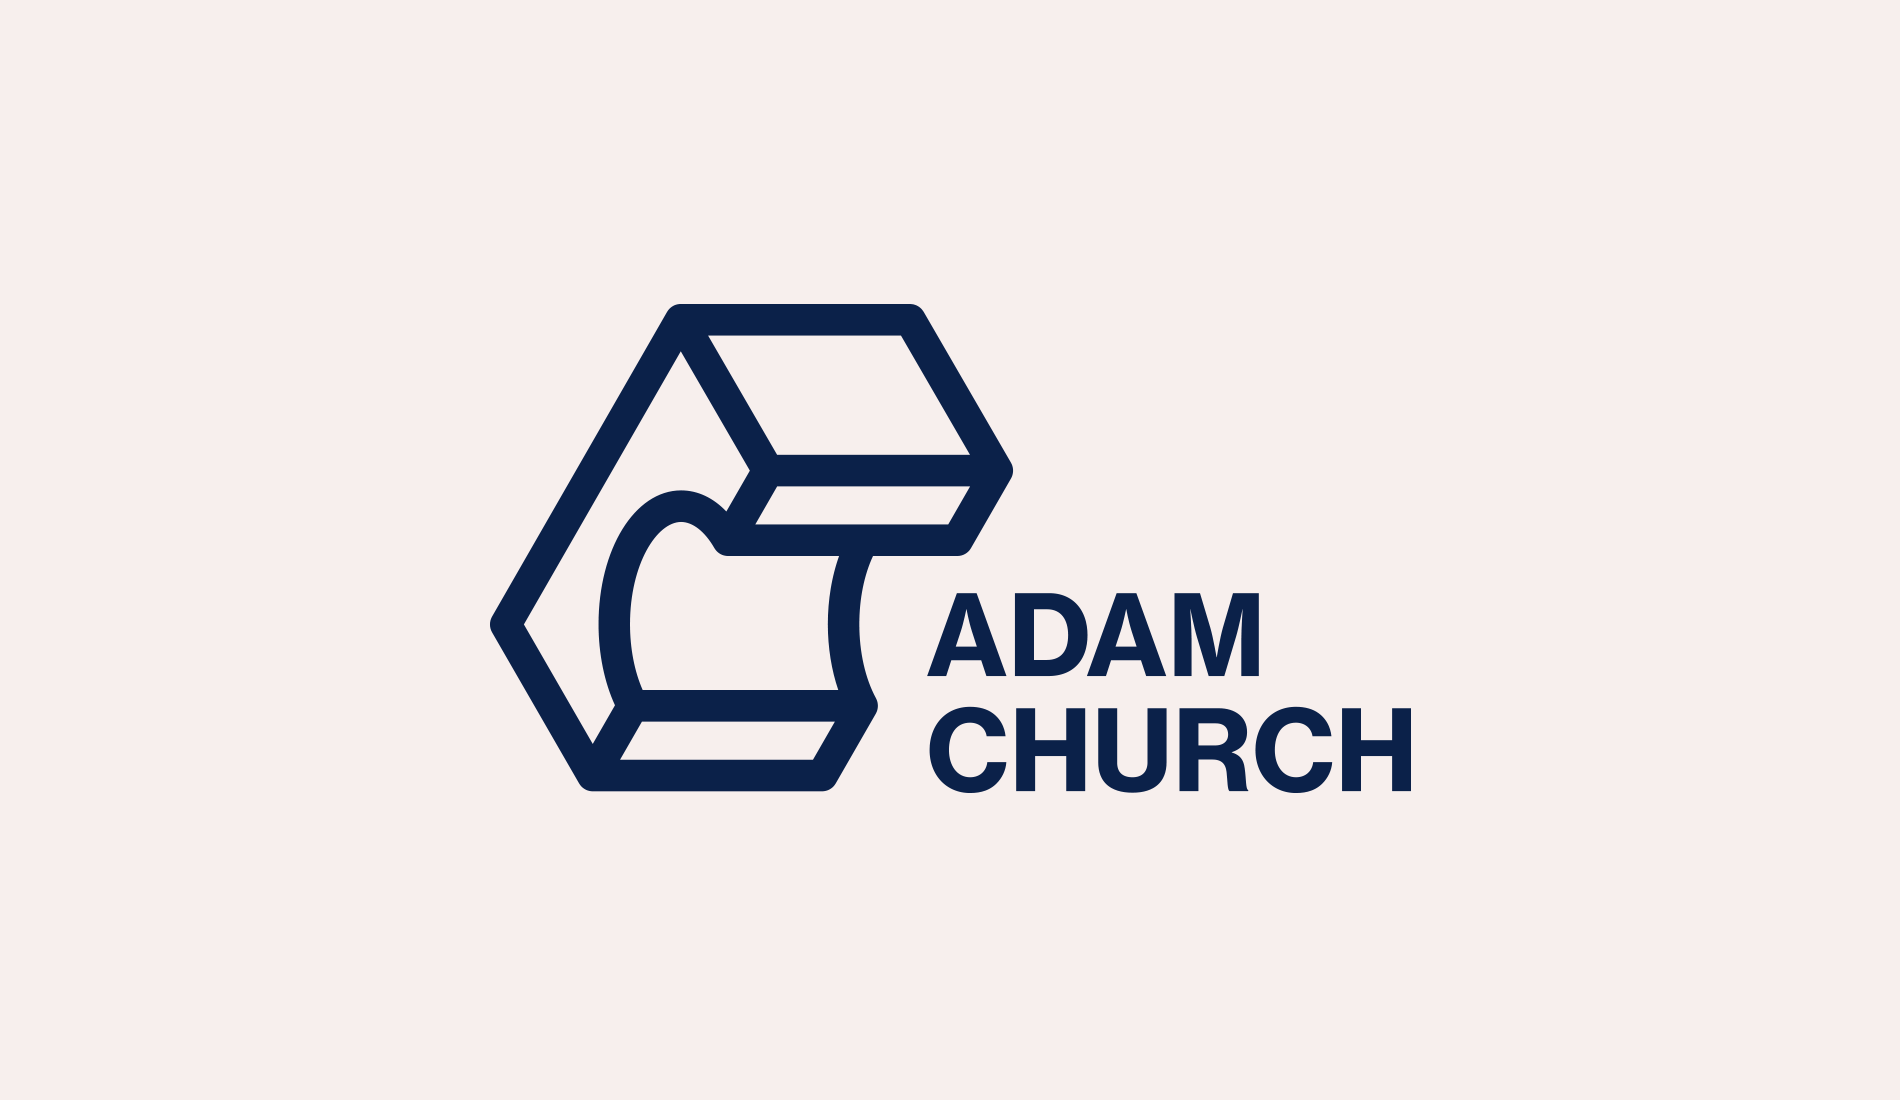 Adam Church Property Management logo design and branding by Fhoke